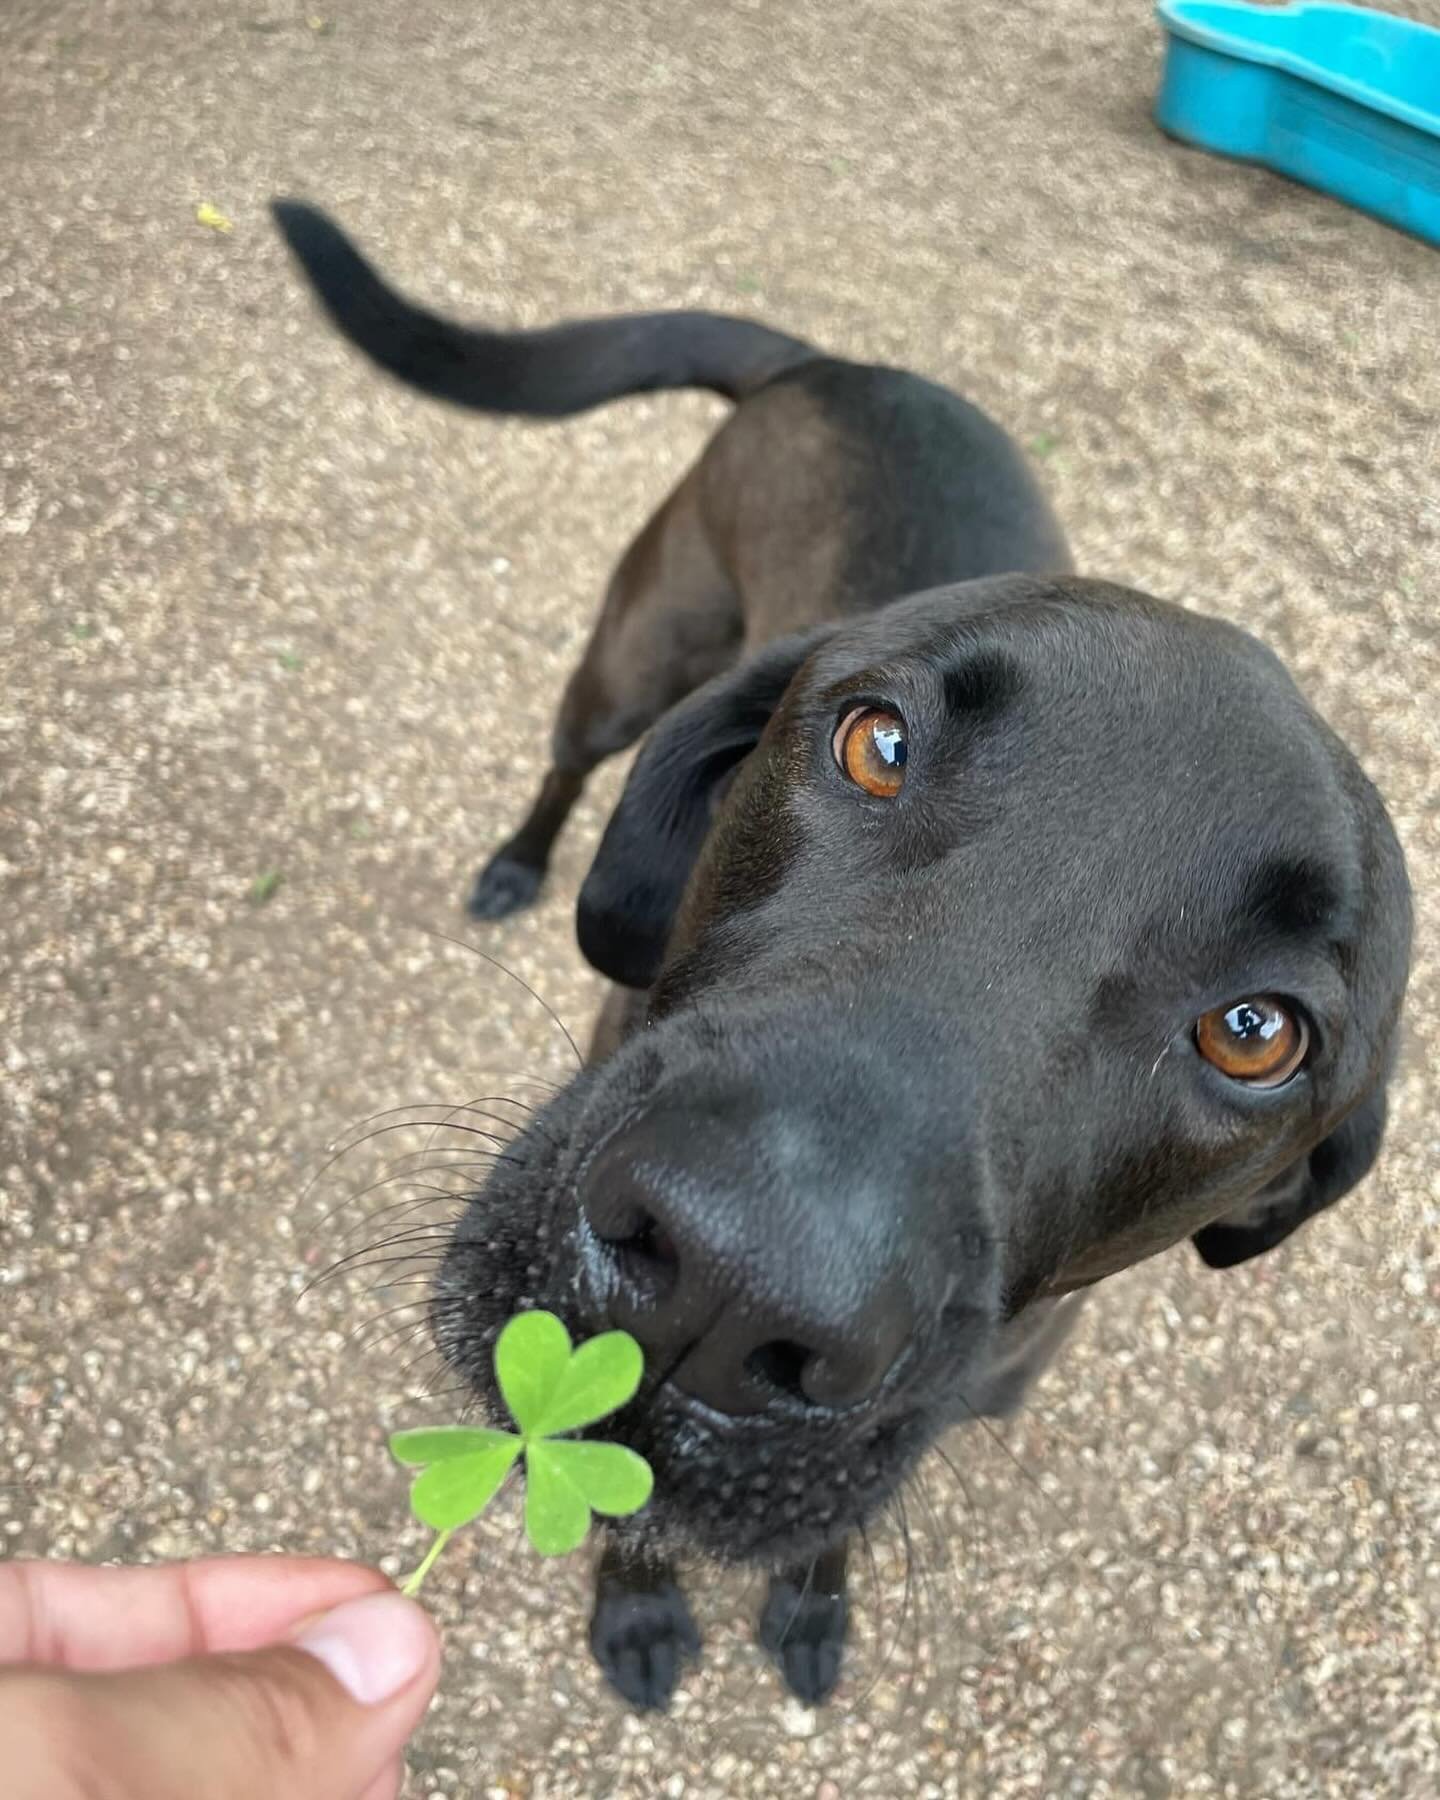 No four leaf clovers found today; but we still got so lucky with the having the cutest pups in town come play! 
Happy Thursday from all of us at P&amp;P!!☘️💖🐾